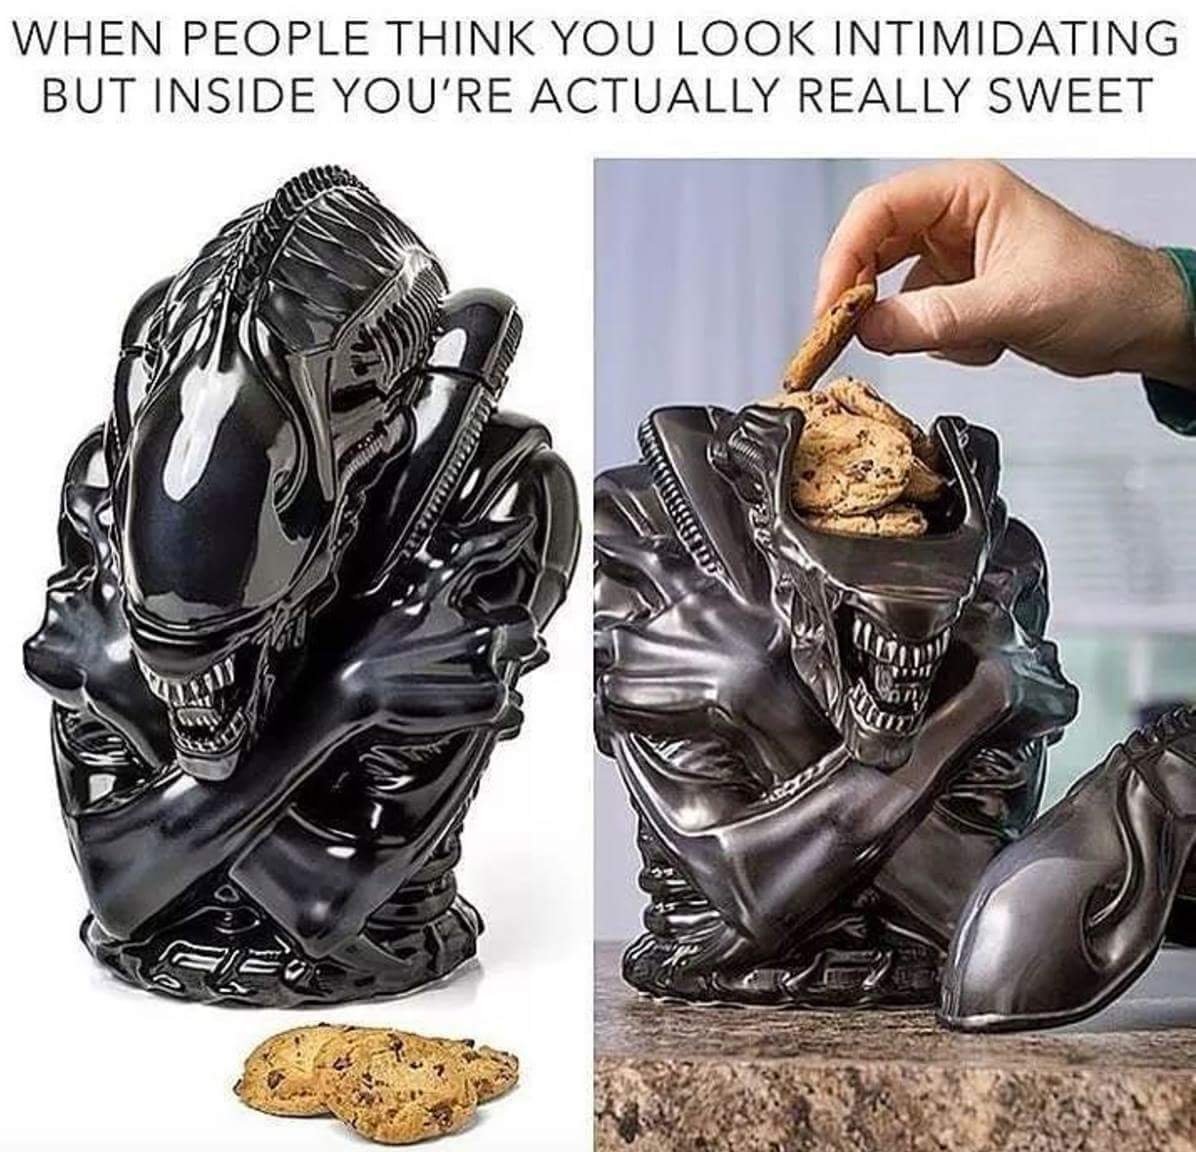 Forget The Meme, I Want The Cookie Jar    Lv426